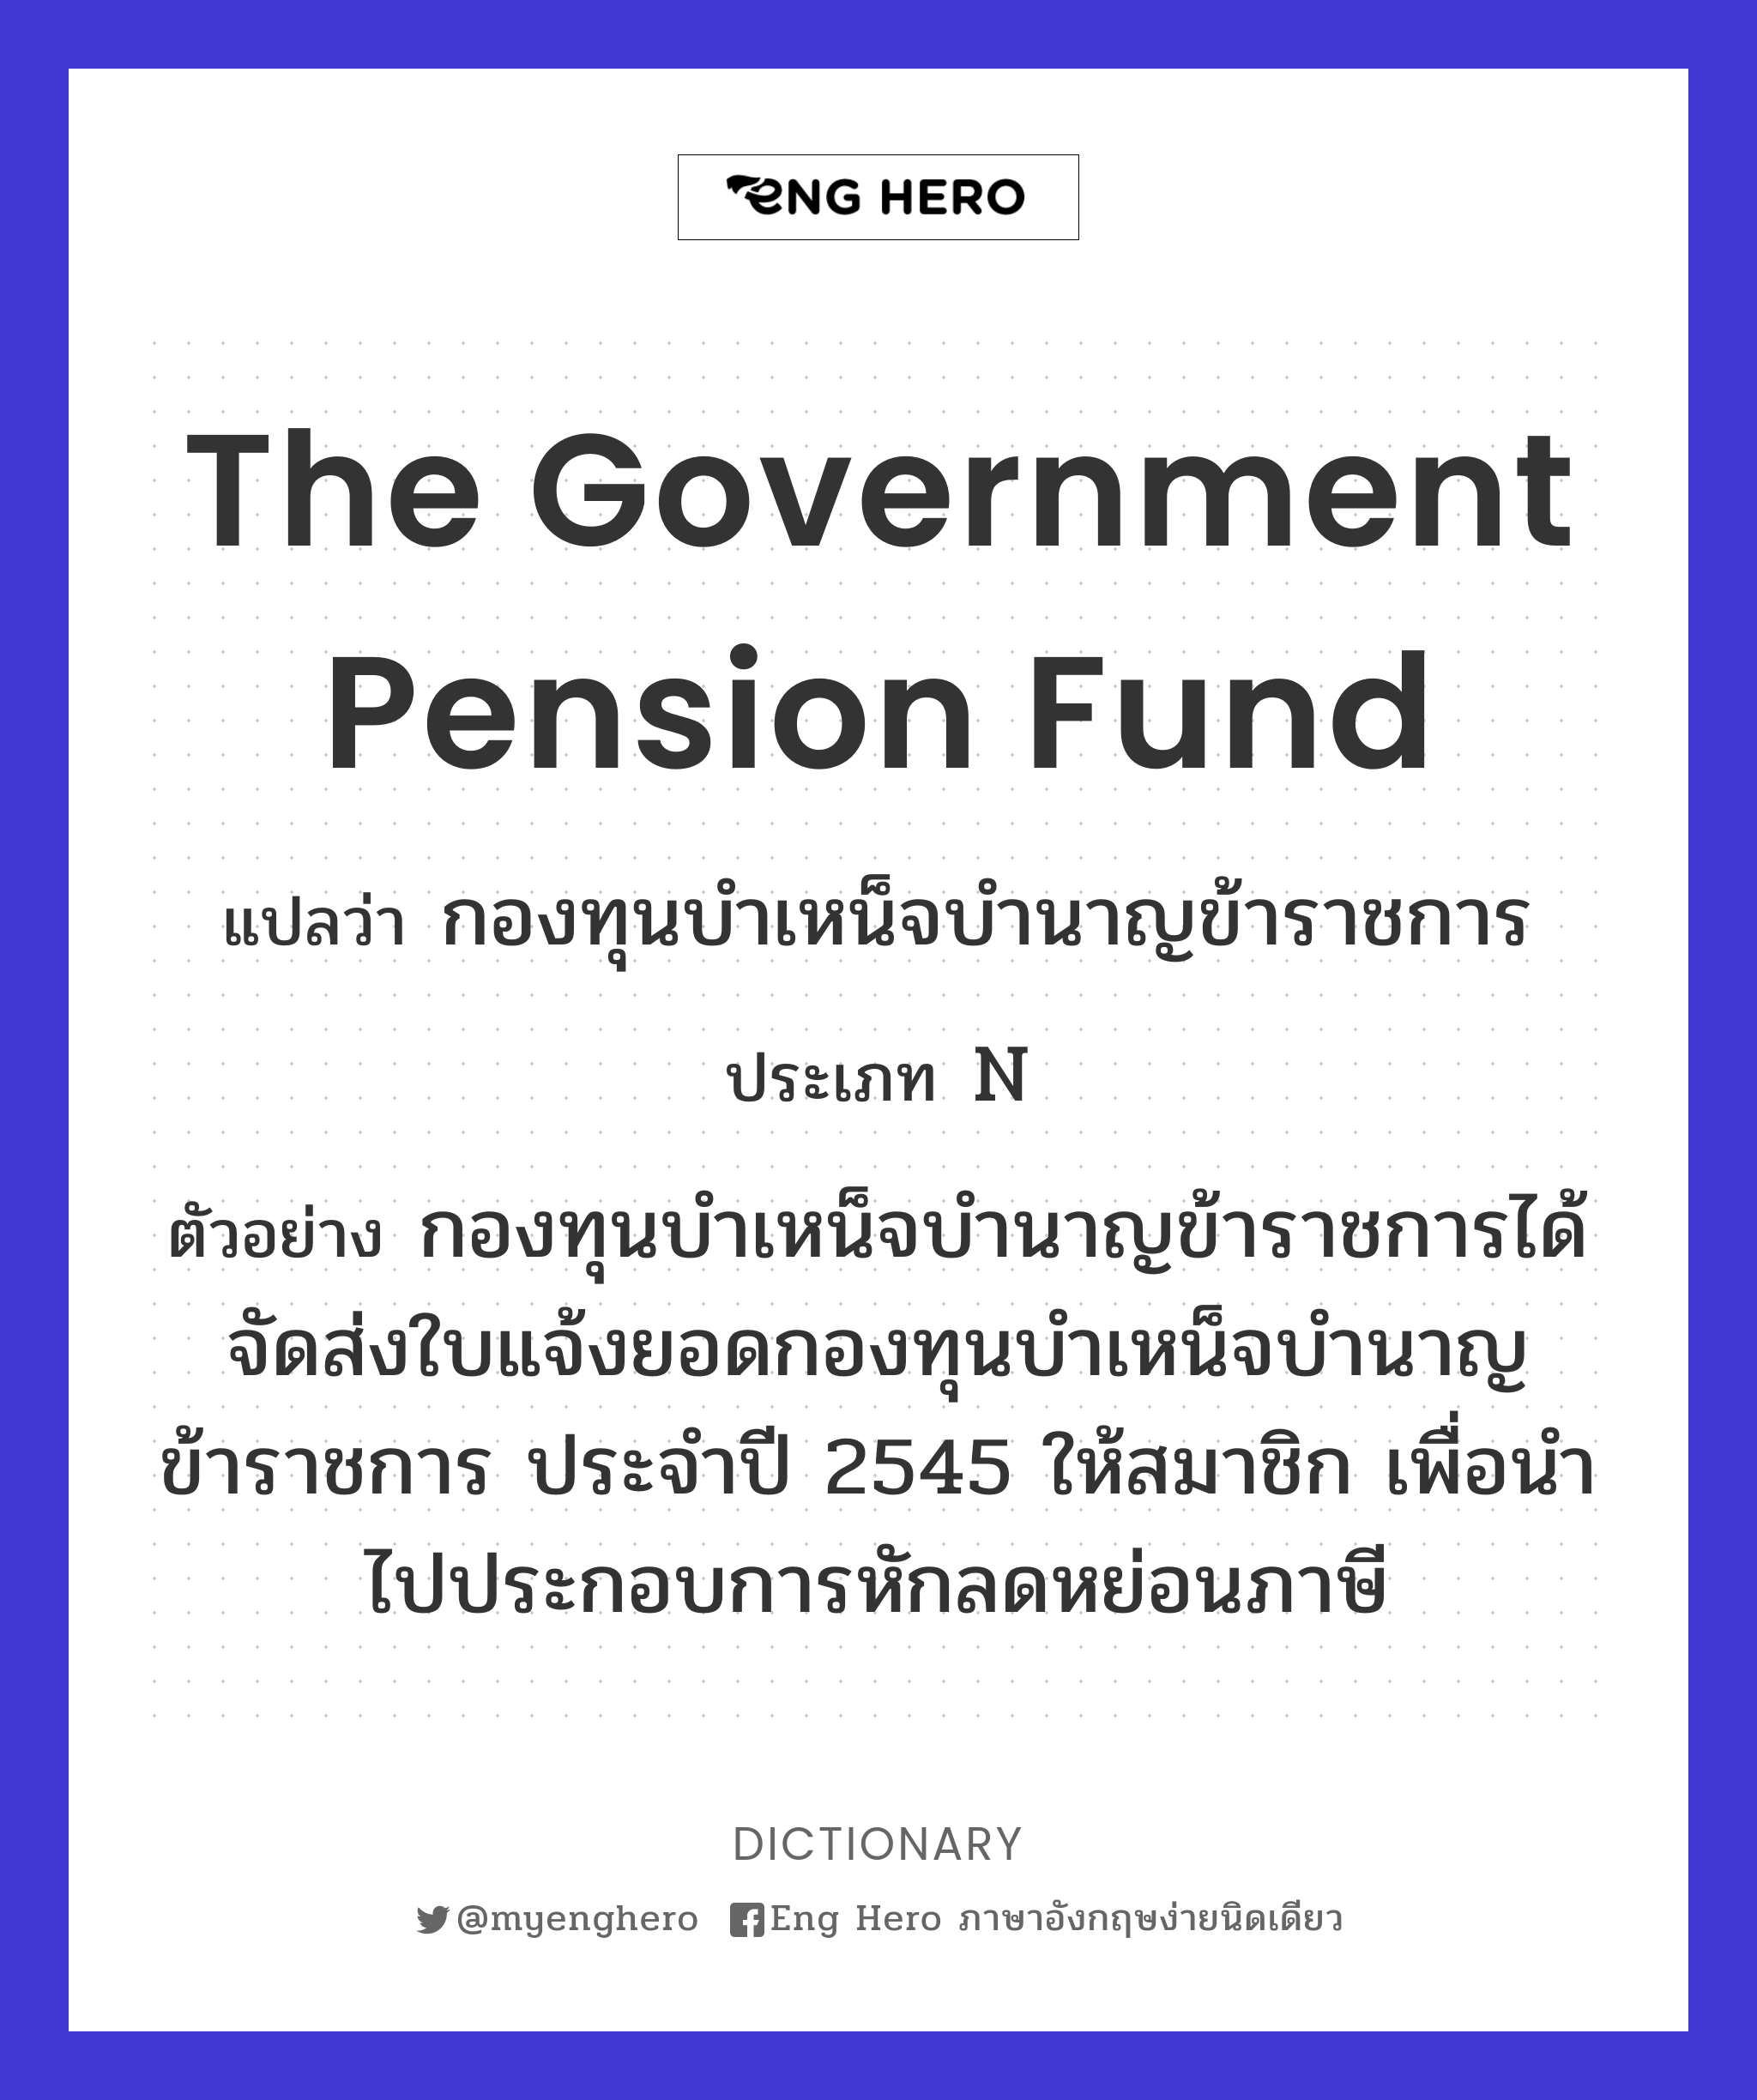 The Government Pension Fund